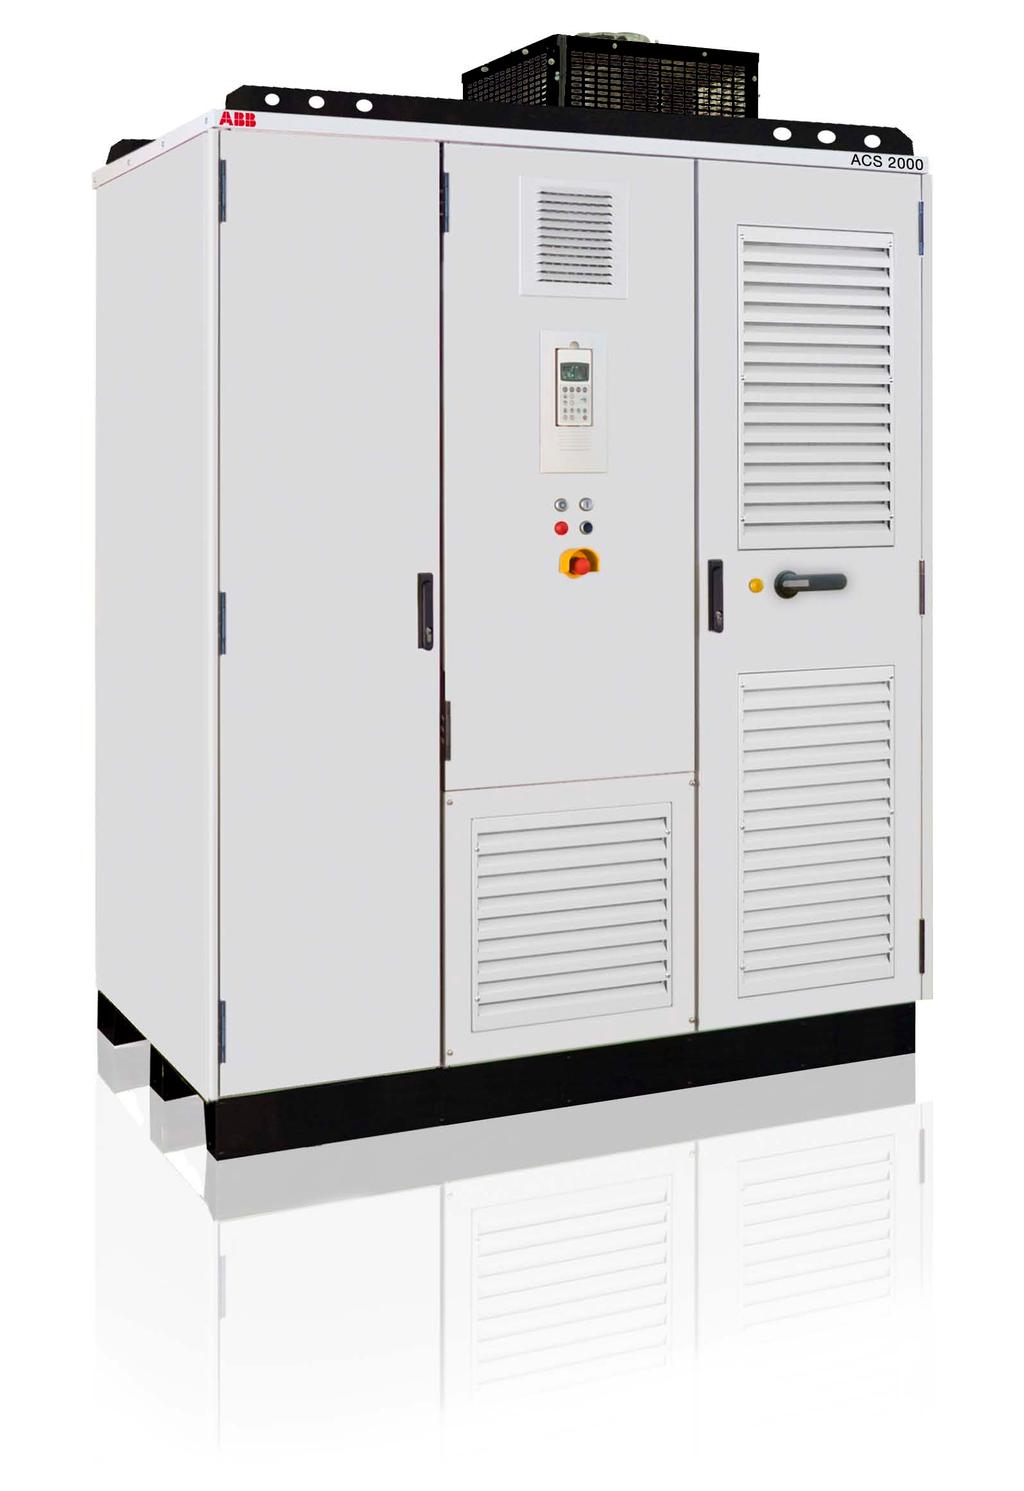 ACS 2000 The air-cooled general purpose drive provides simple and reliable motor control for a wide range of applications. ACS 2000, 800 kw, 6.